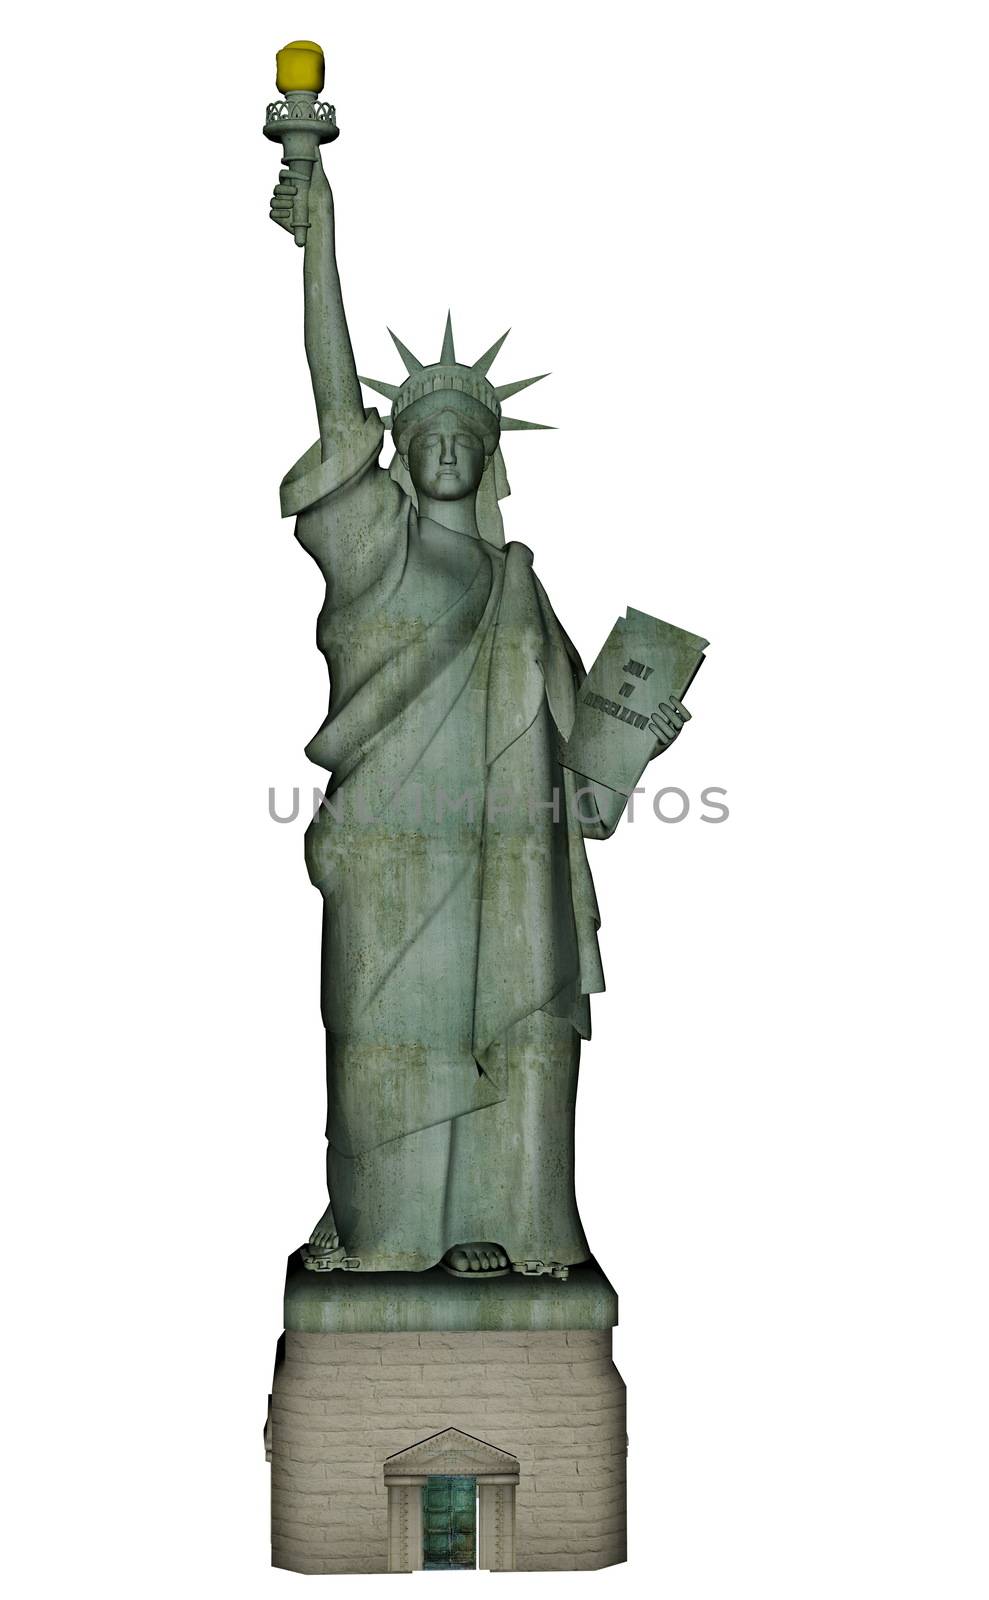 Statue of Liberty - 3D render by Elenaphotos21